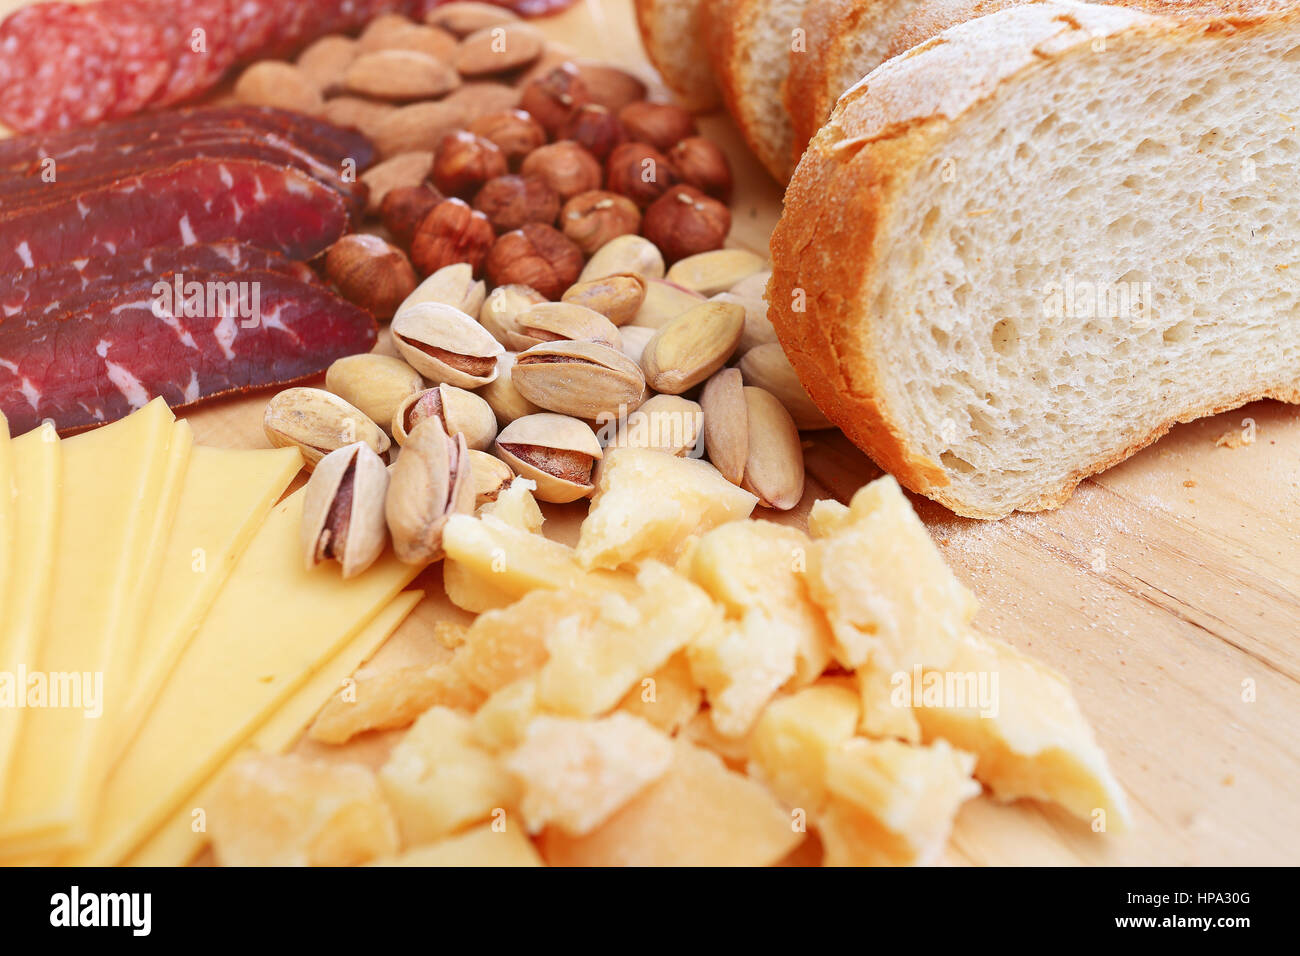 Tasty food background. Bread and cheese on wooden table. Pistachio close-up on wooden board. Stock Photo